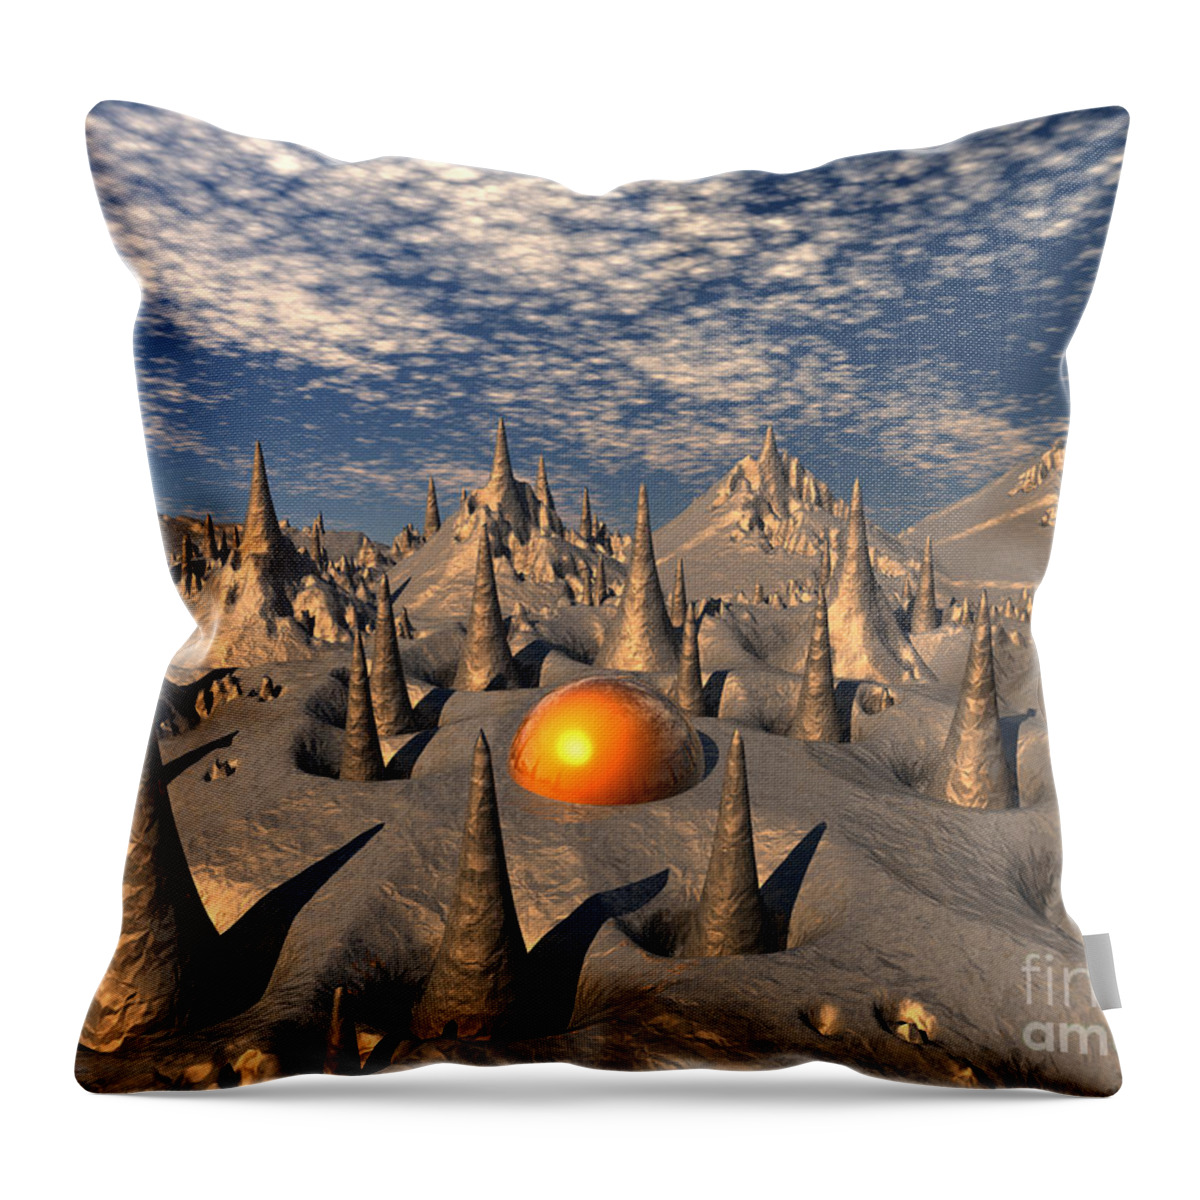 Sci Fi Throw Pillow featuring the digital art Reflections of Another World by Phil Perkins